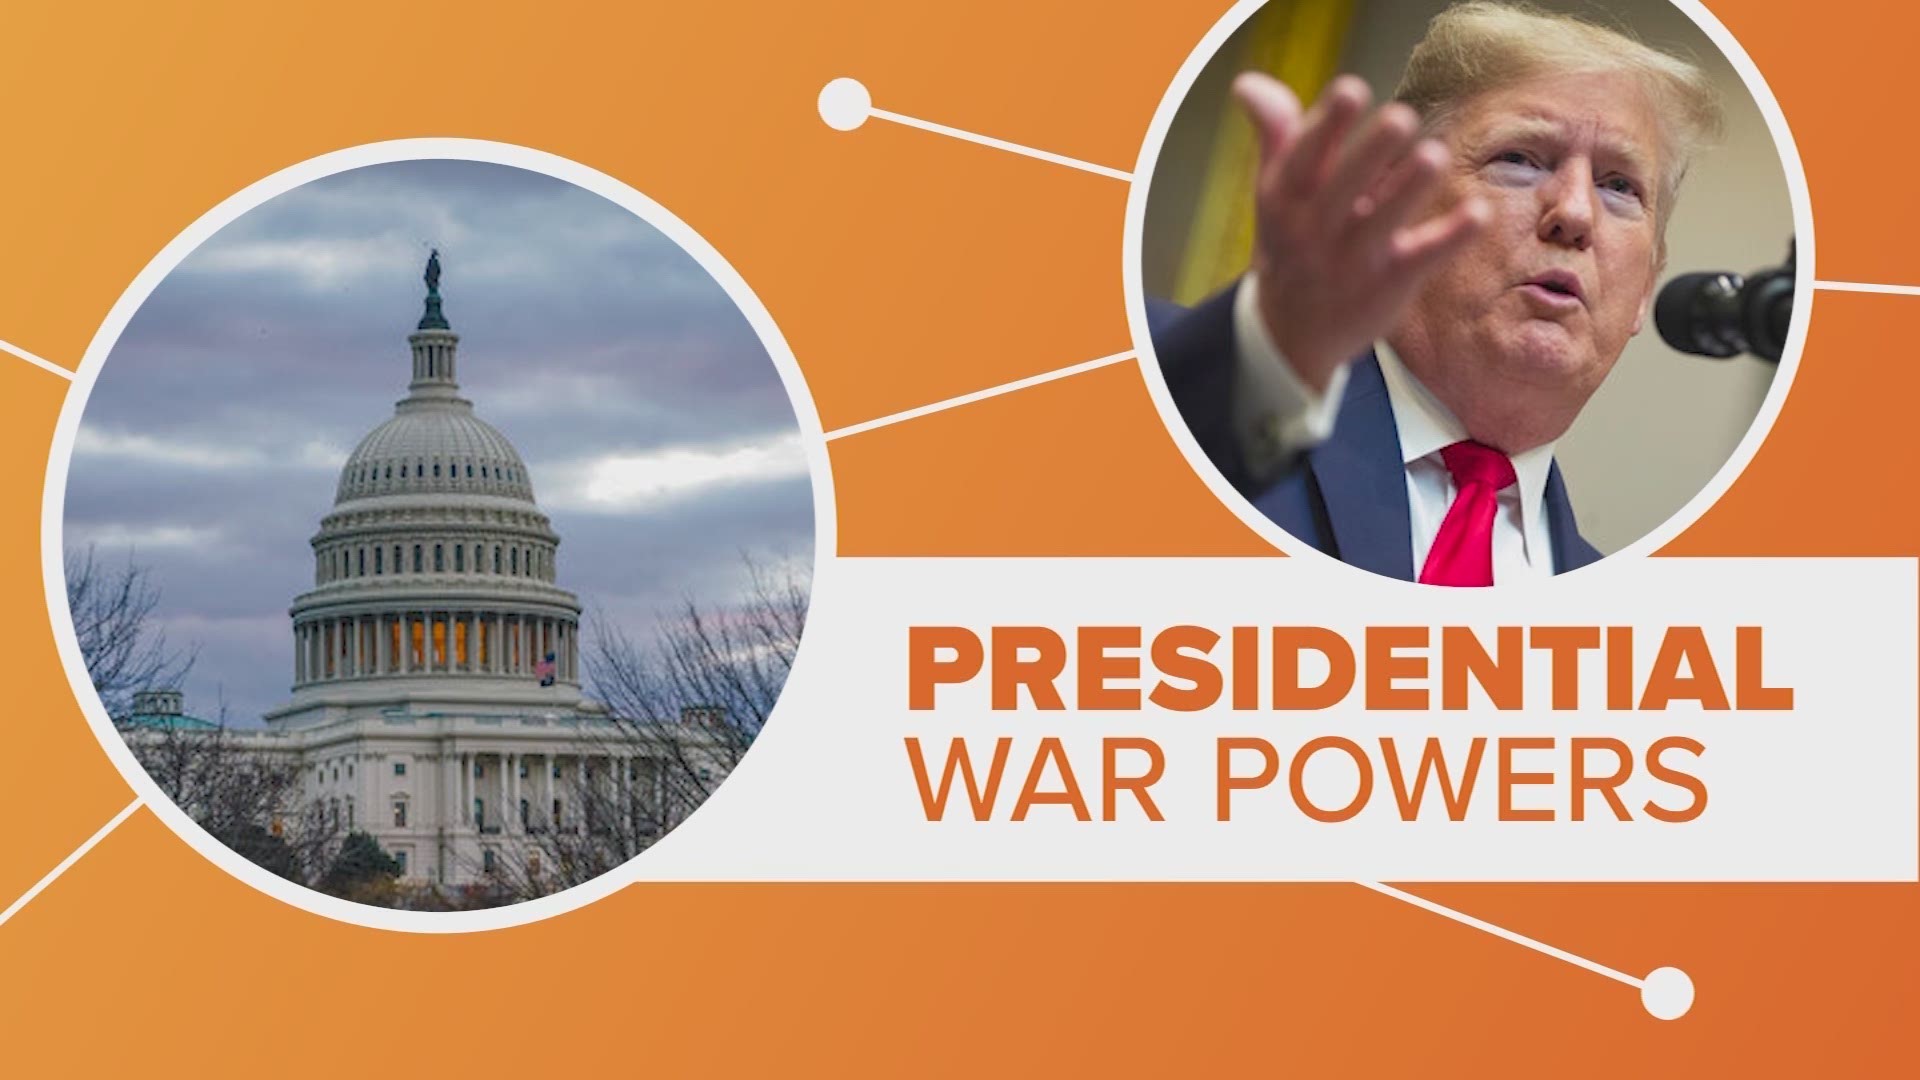 Since the Iran attack ordered by President Trump, you've been hearing the term "war powers" a lot. But what does it mean and who really has the power?